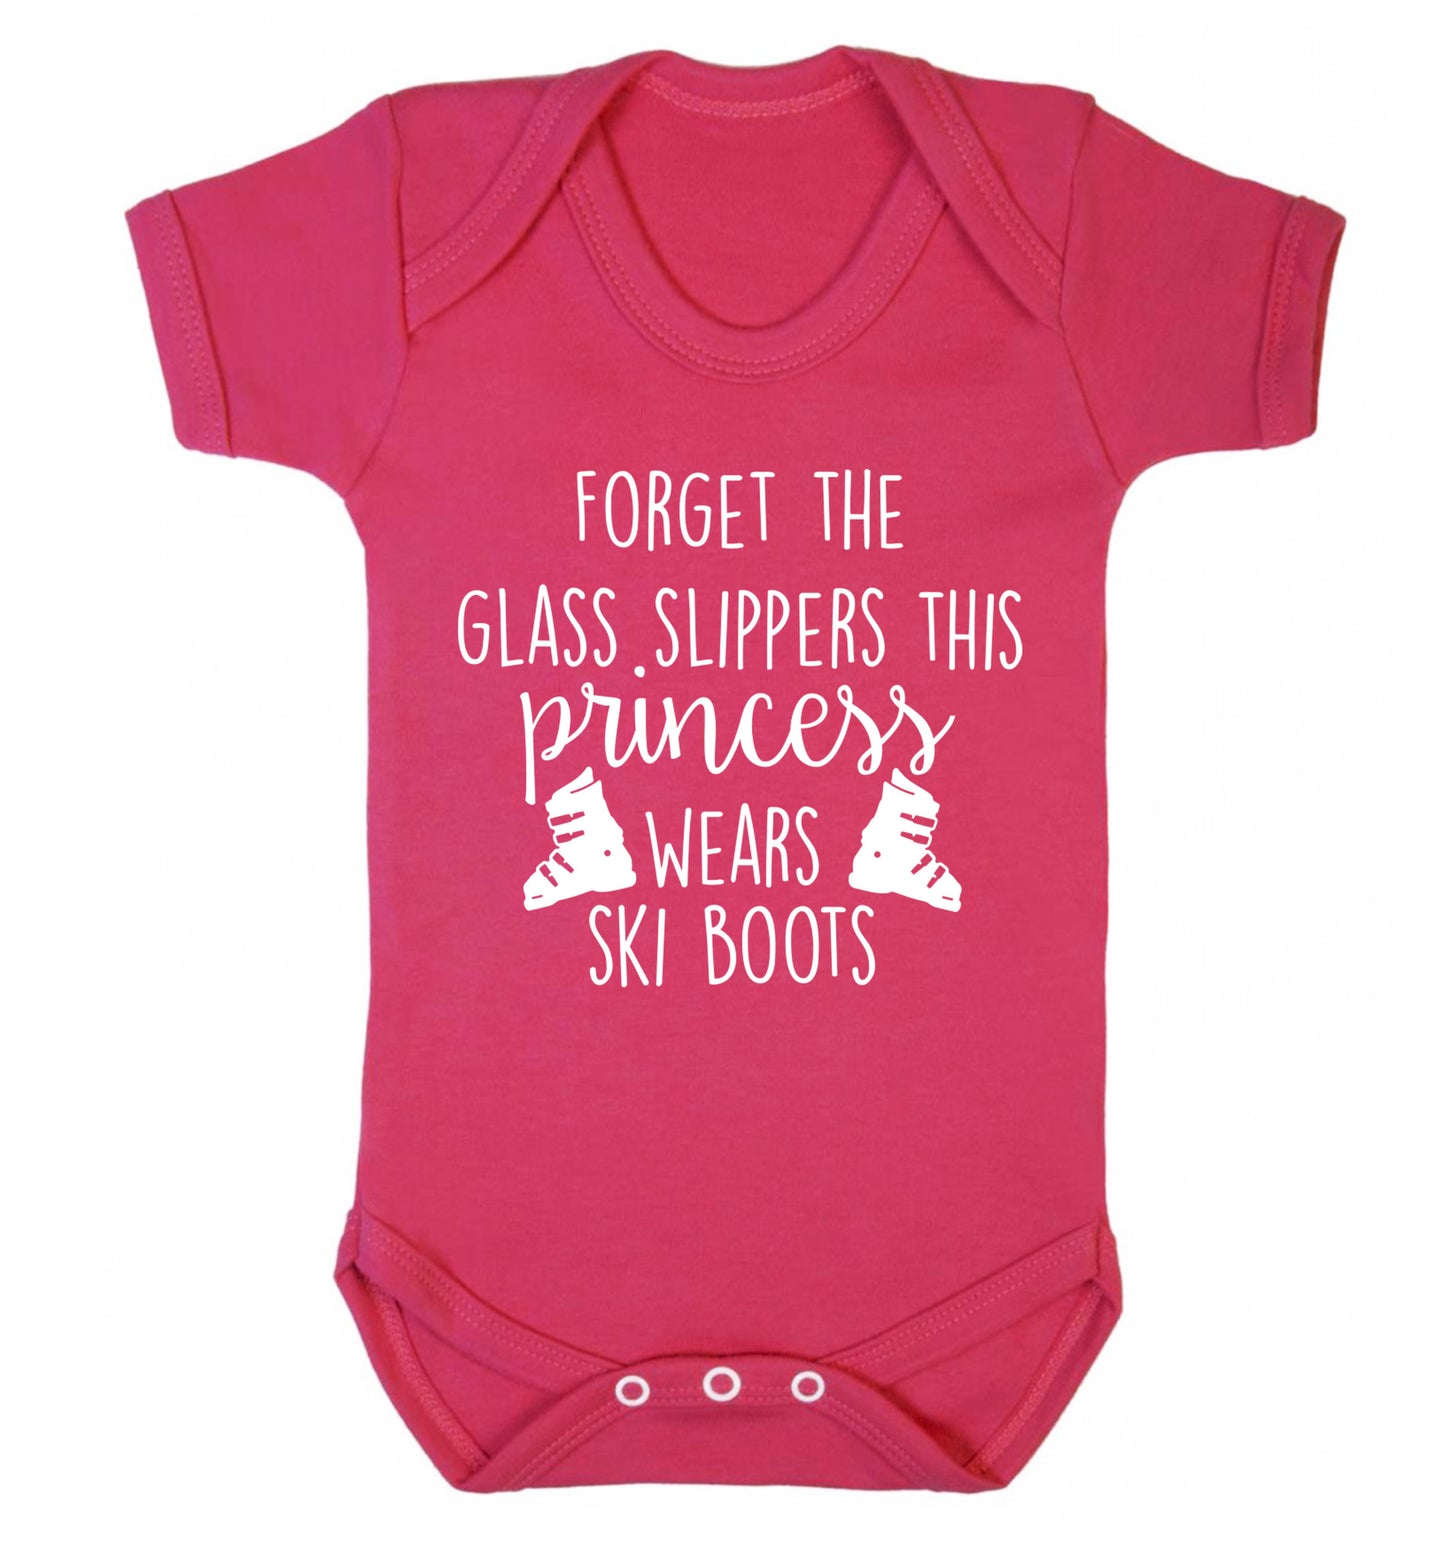 Forget the glass slippers this princess wears ski boots Baby Vest dark pink 18-24 months